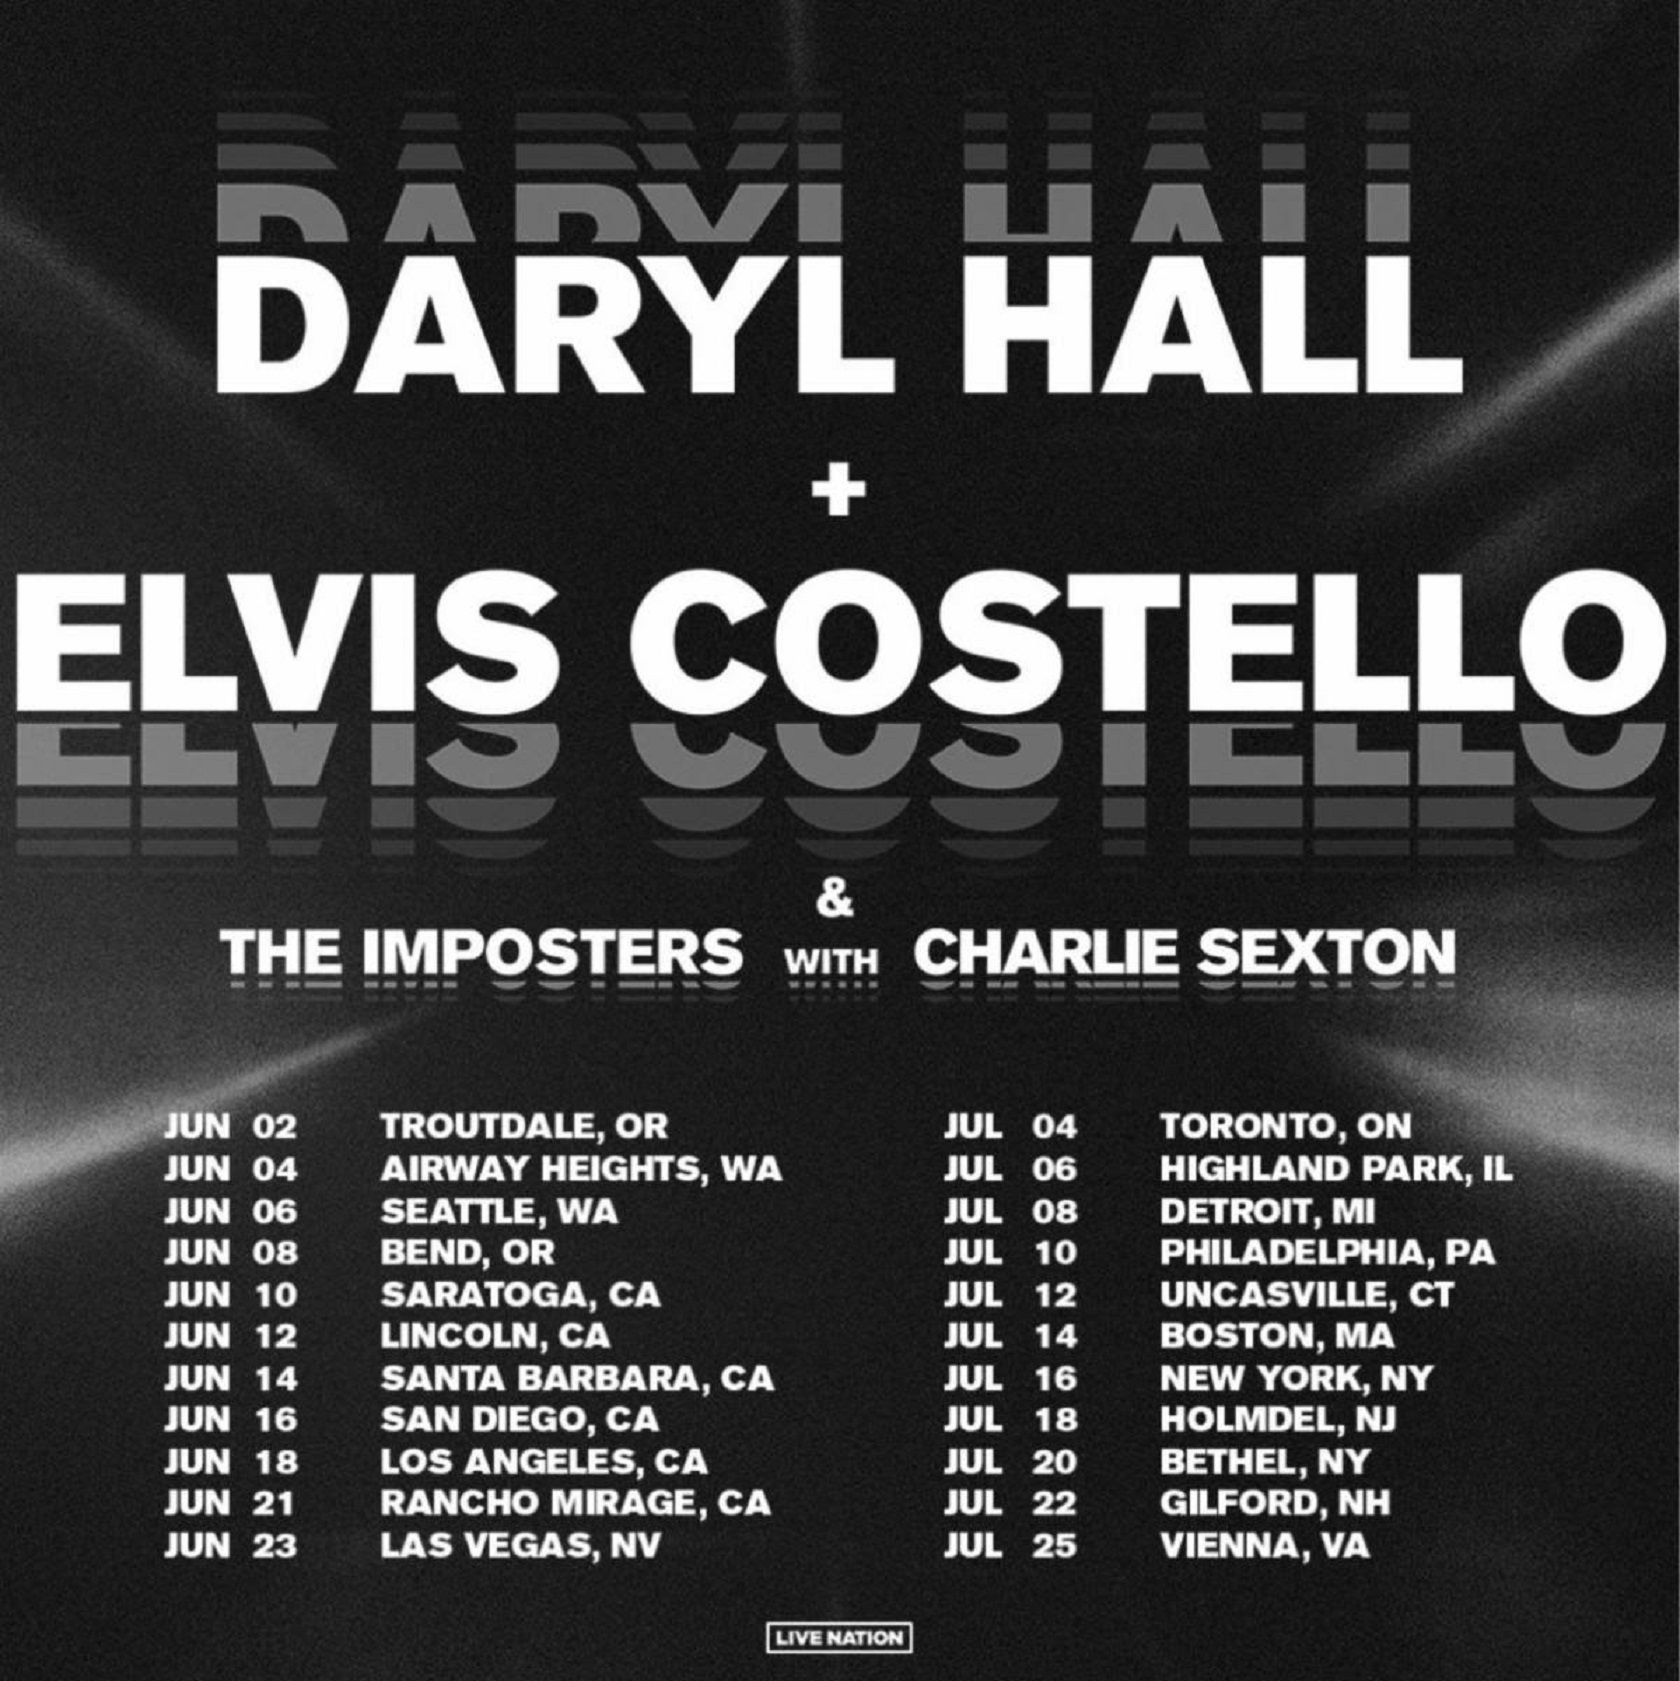 Daryl Hall and Elvis Costello & The Imposters Announce Co-Headlining Summer Tour